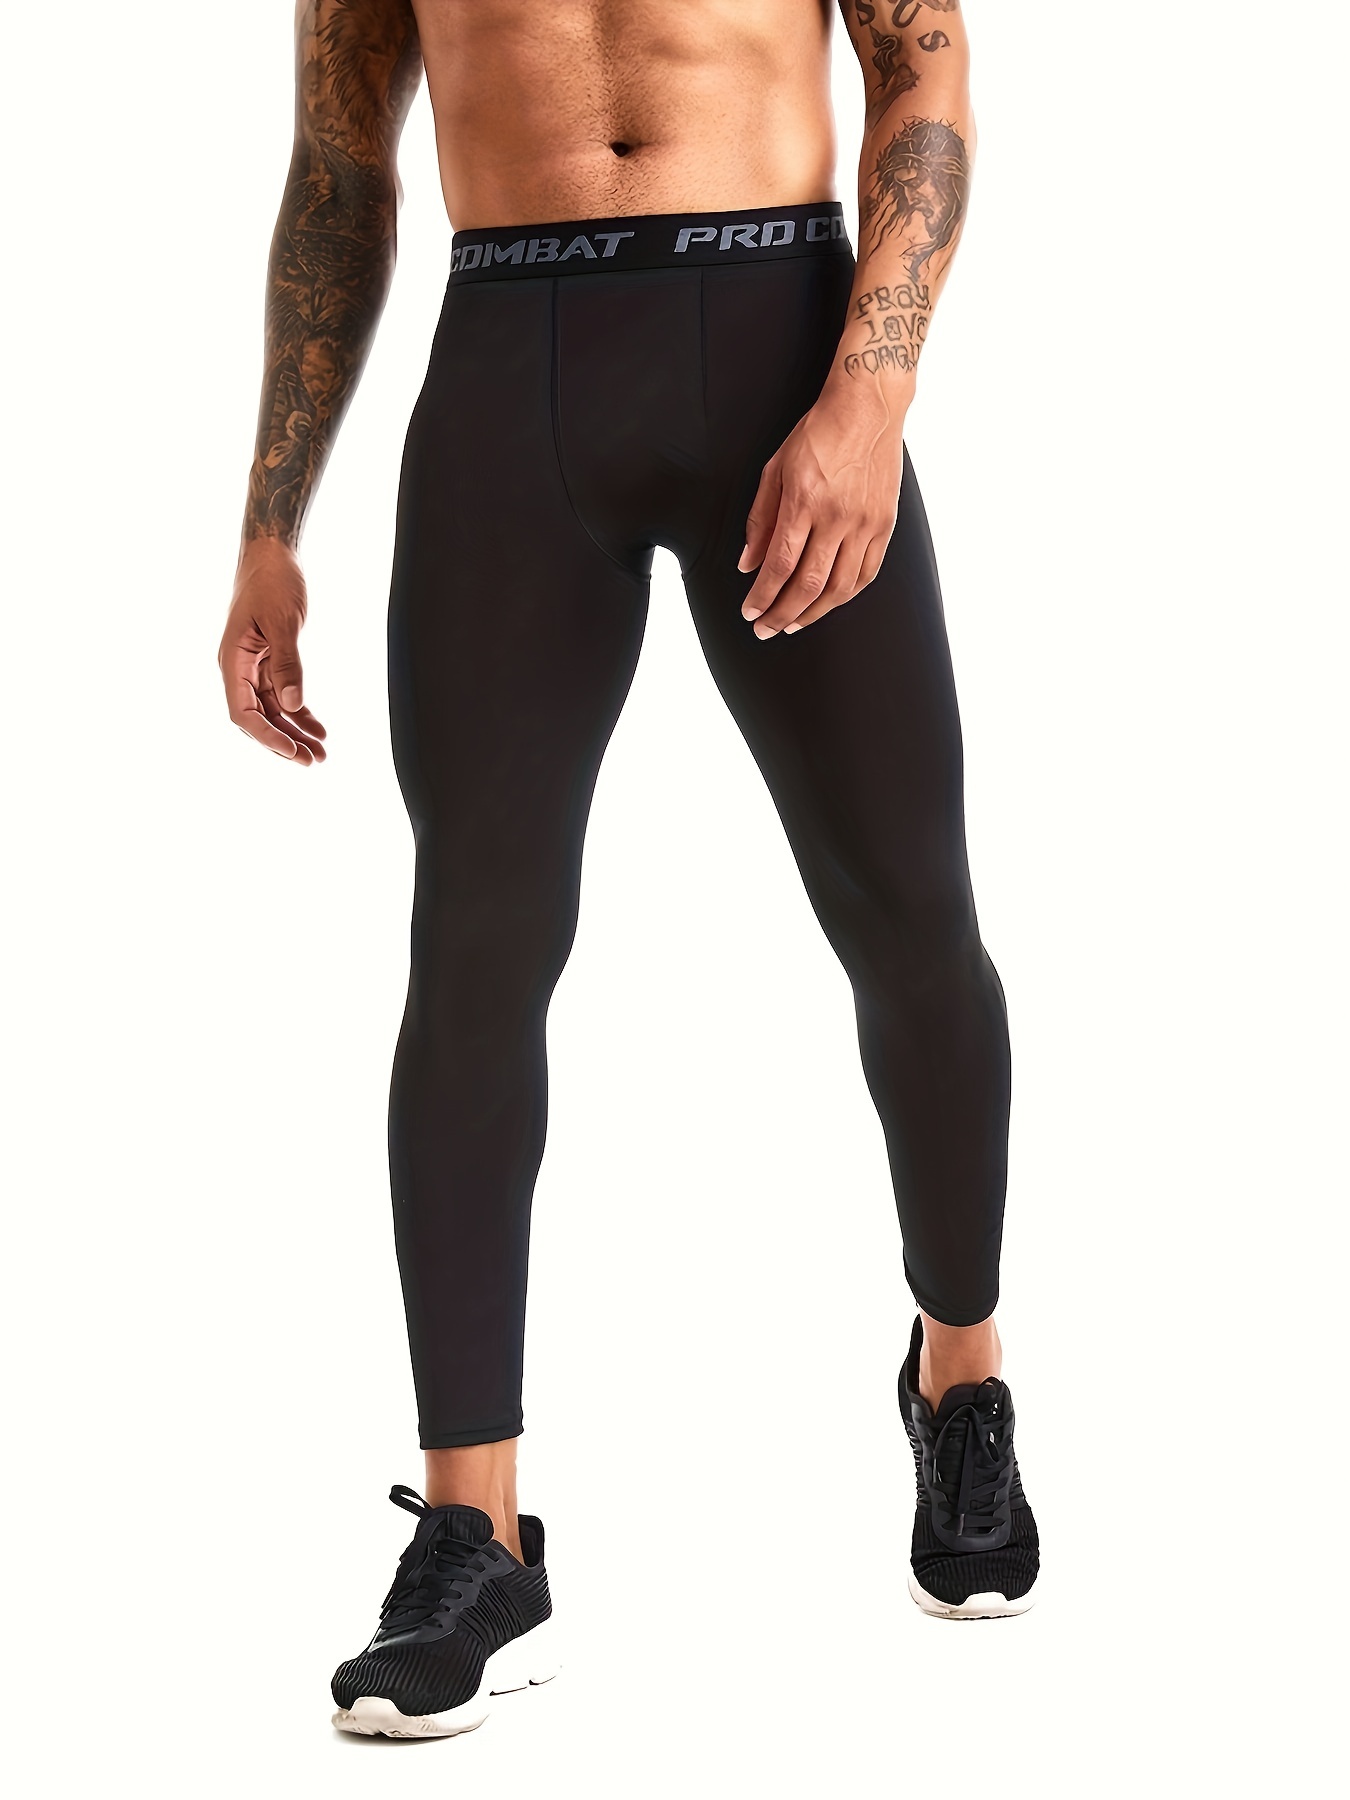 Men's Compression Pants Running Tights Workout Leggings, Cool Dry Technical  Sports Baselayer 